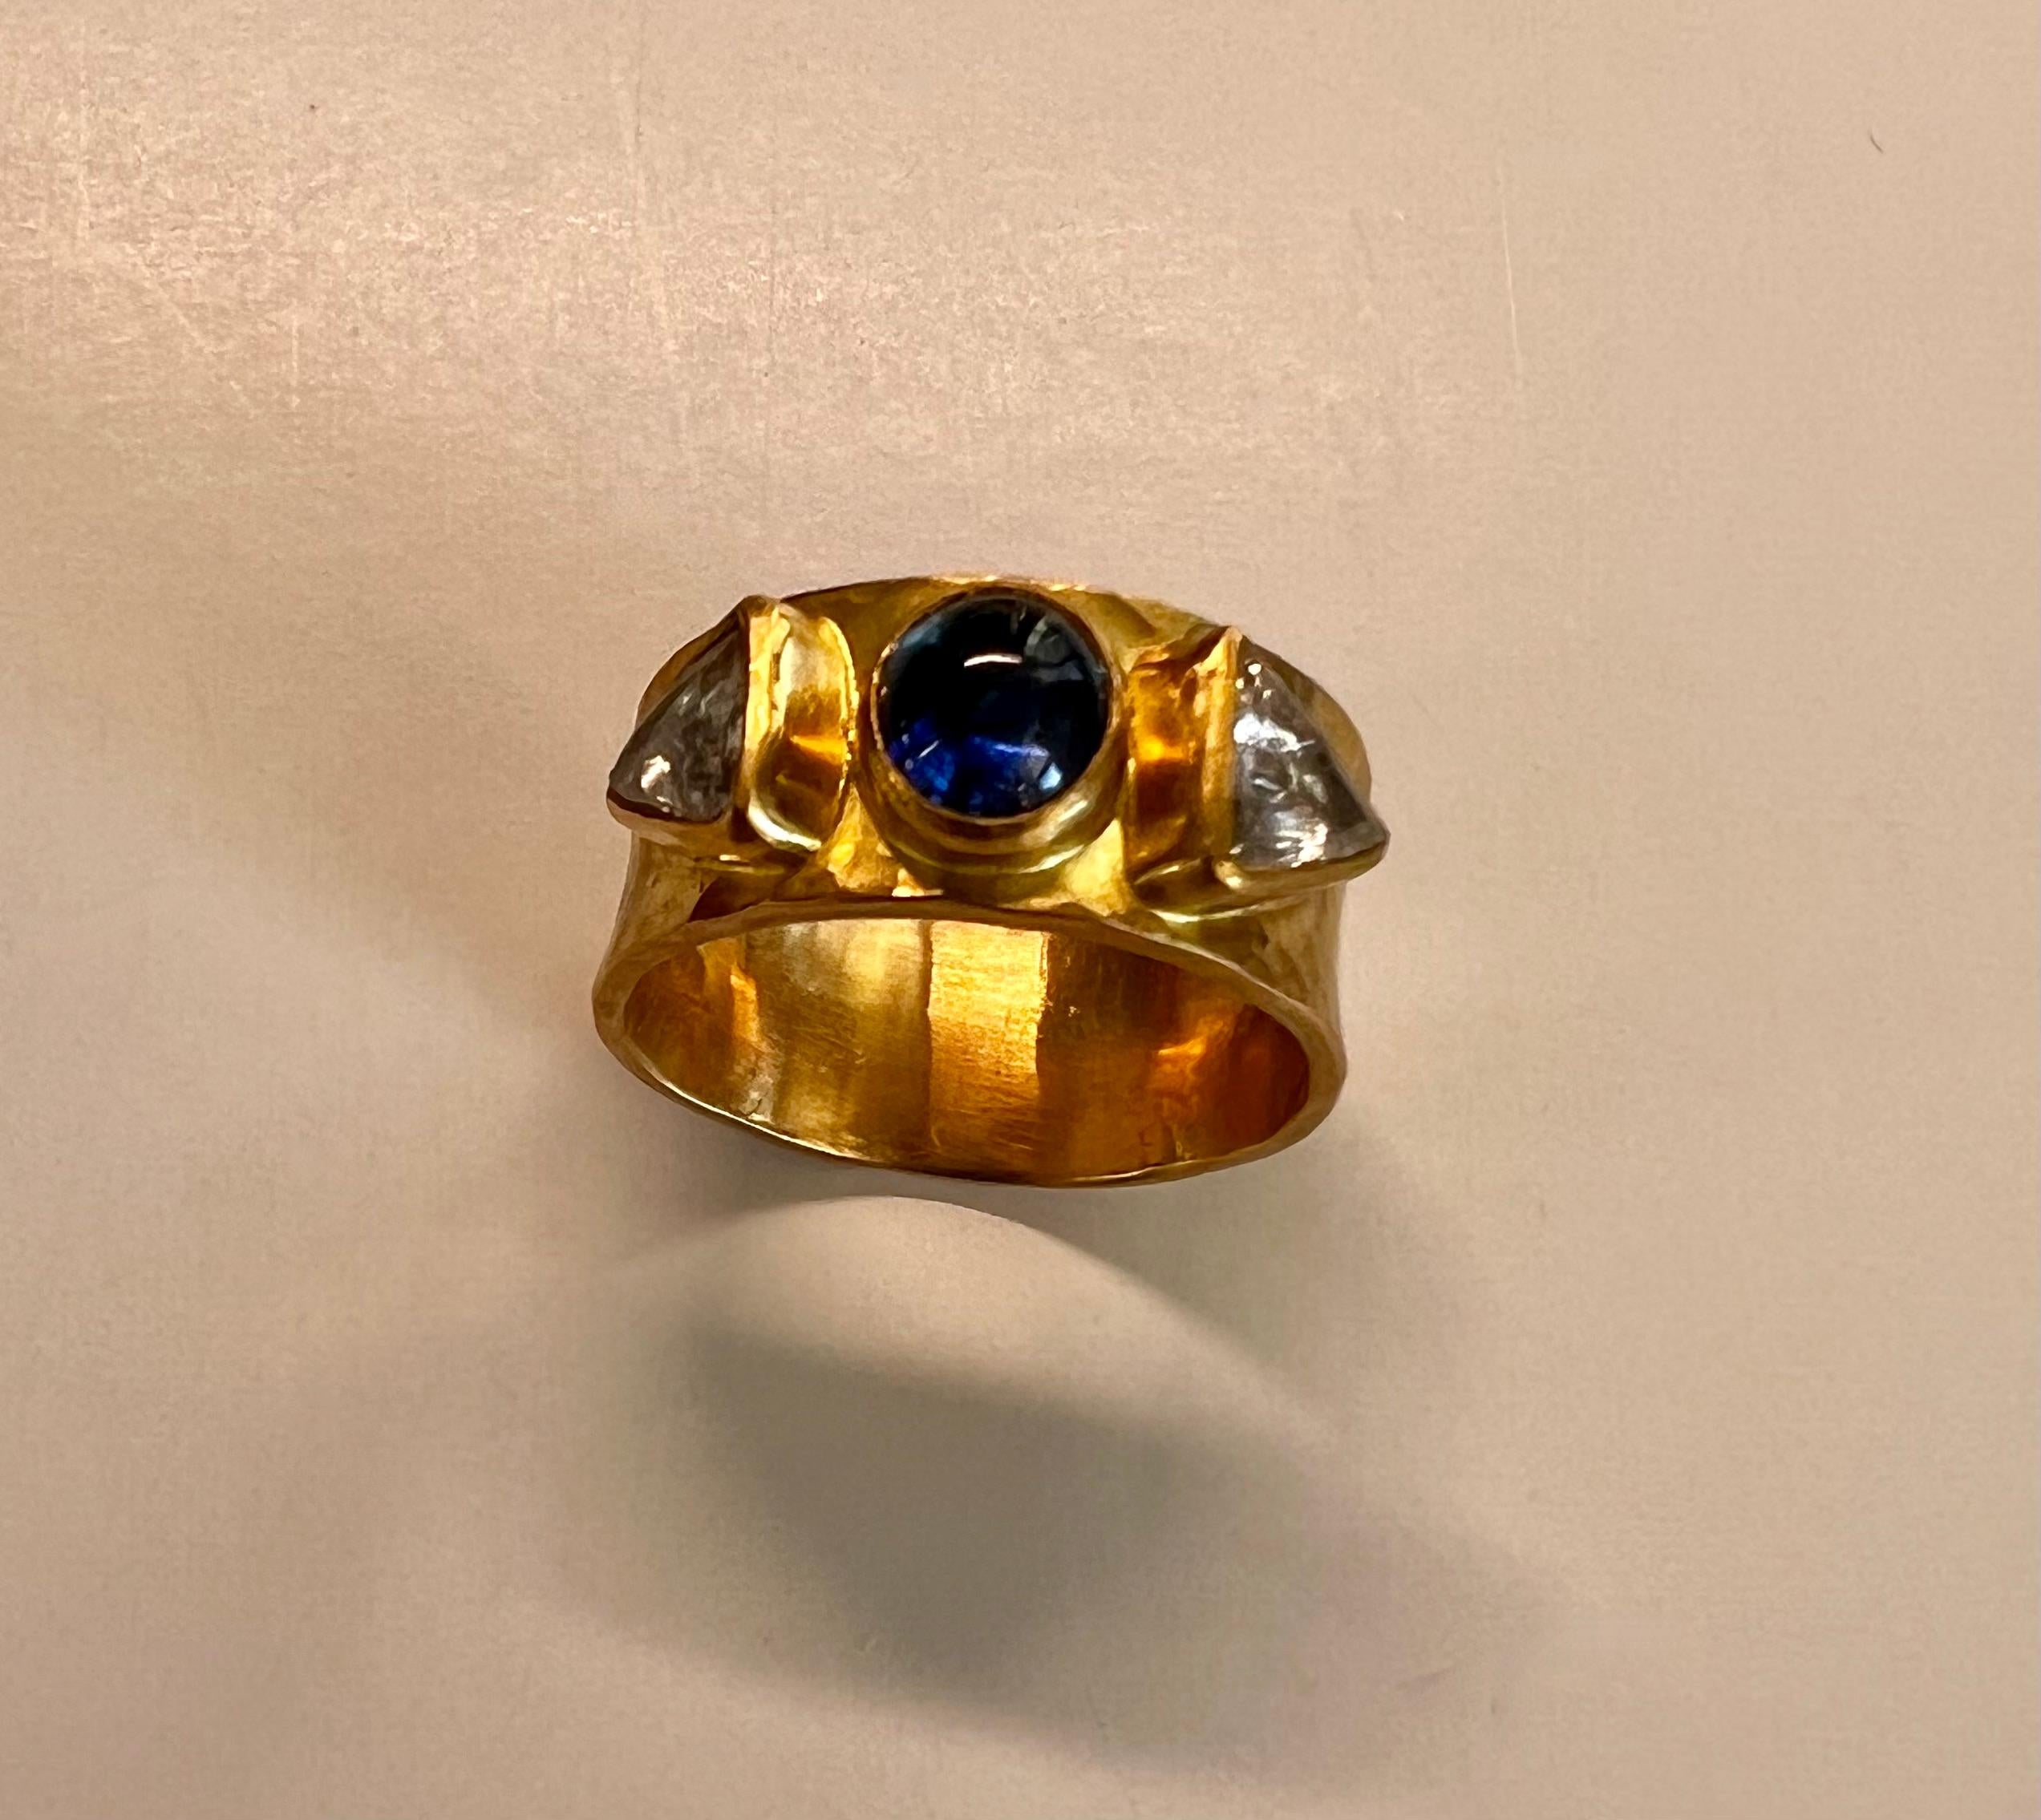 20 and 22 Karat ring with oval blue Sapphire cabochon and Macle Diamonds ring, set in a hammered band .
A Macle is a crystalline form, twin-crystal or double crystal such as is seen in octahedral (8) crystals or minerals such as  Diamond or Spinels.